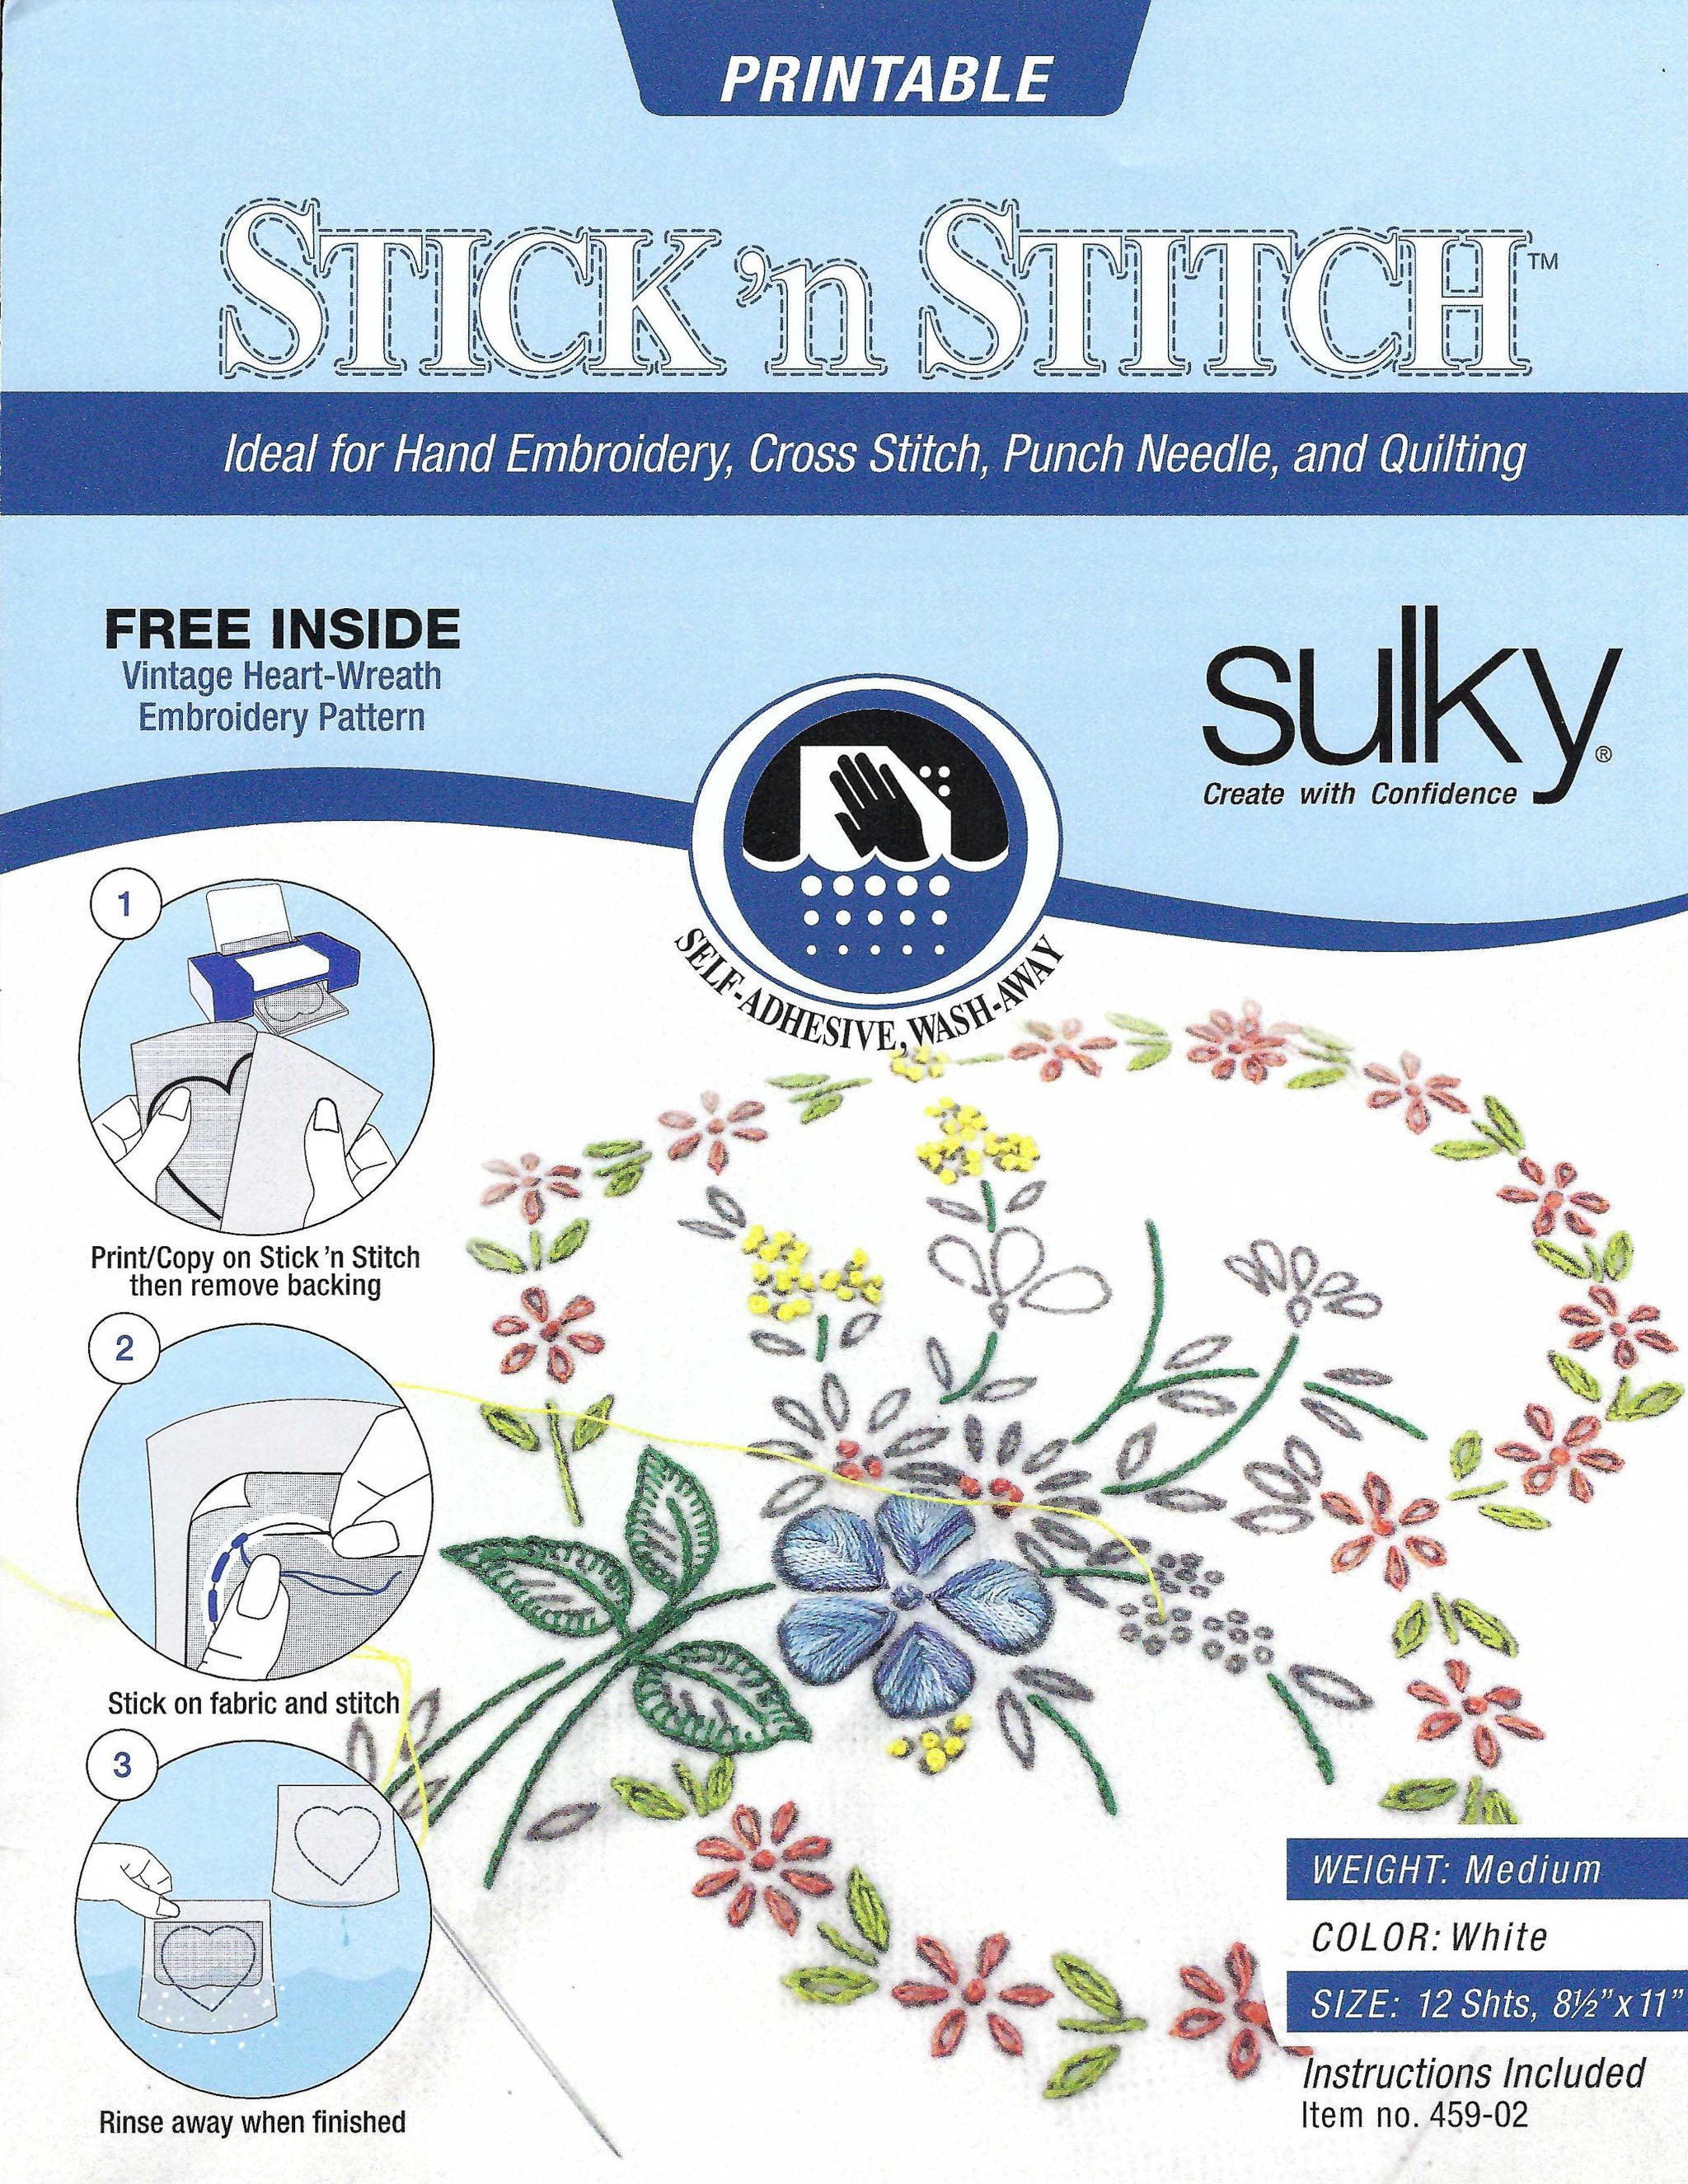 Sticky Fabri-solvy Adhesive Printable Sulky Temporary Water Soluble  Stabilizer for Embroidery, Quilting, Applique 